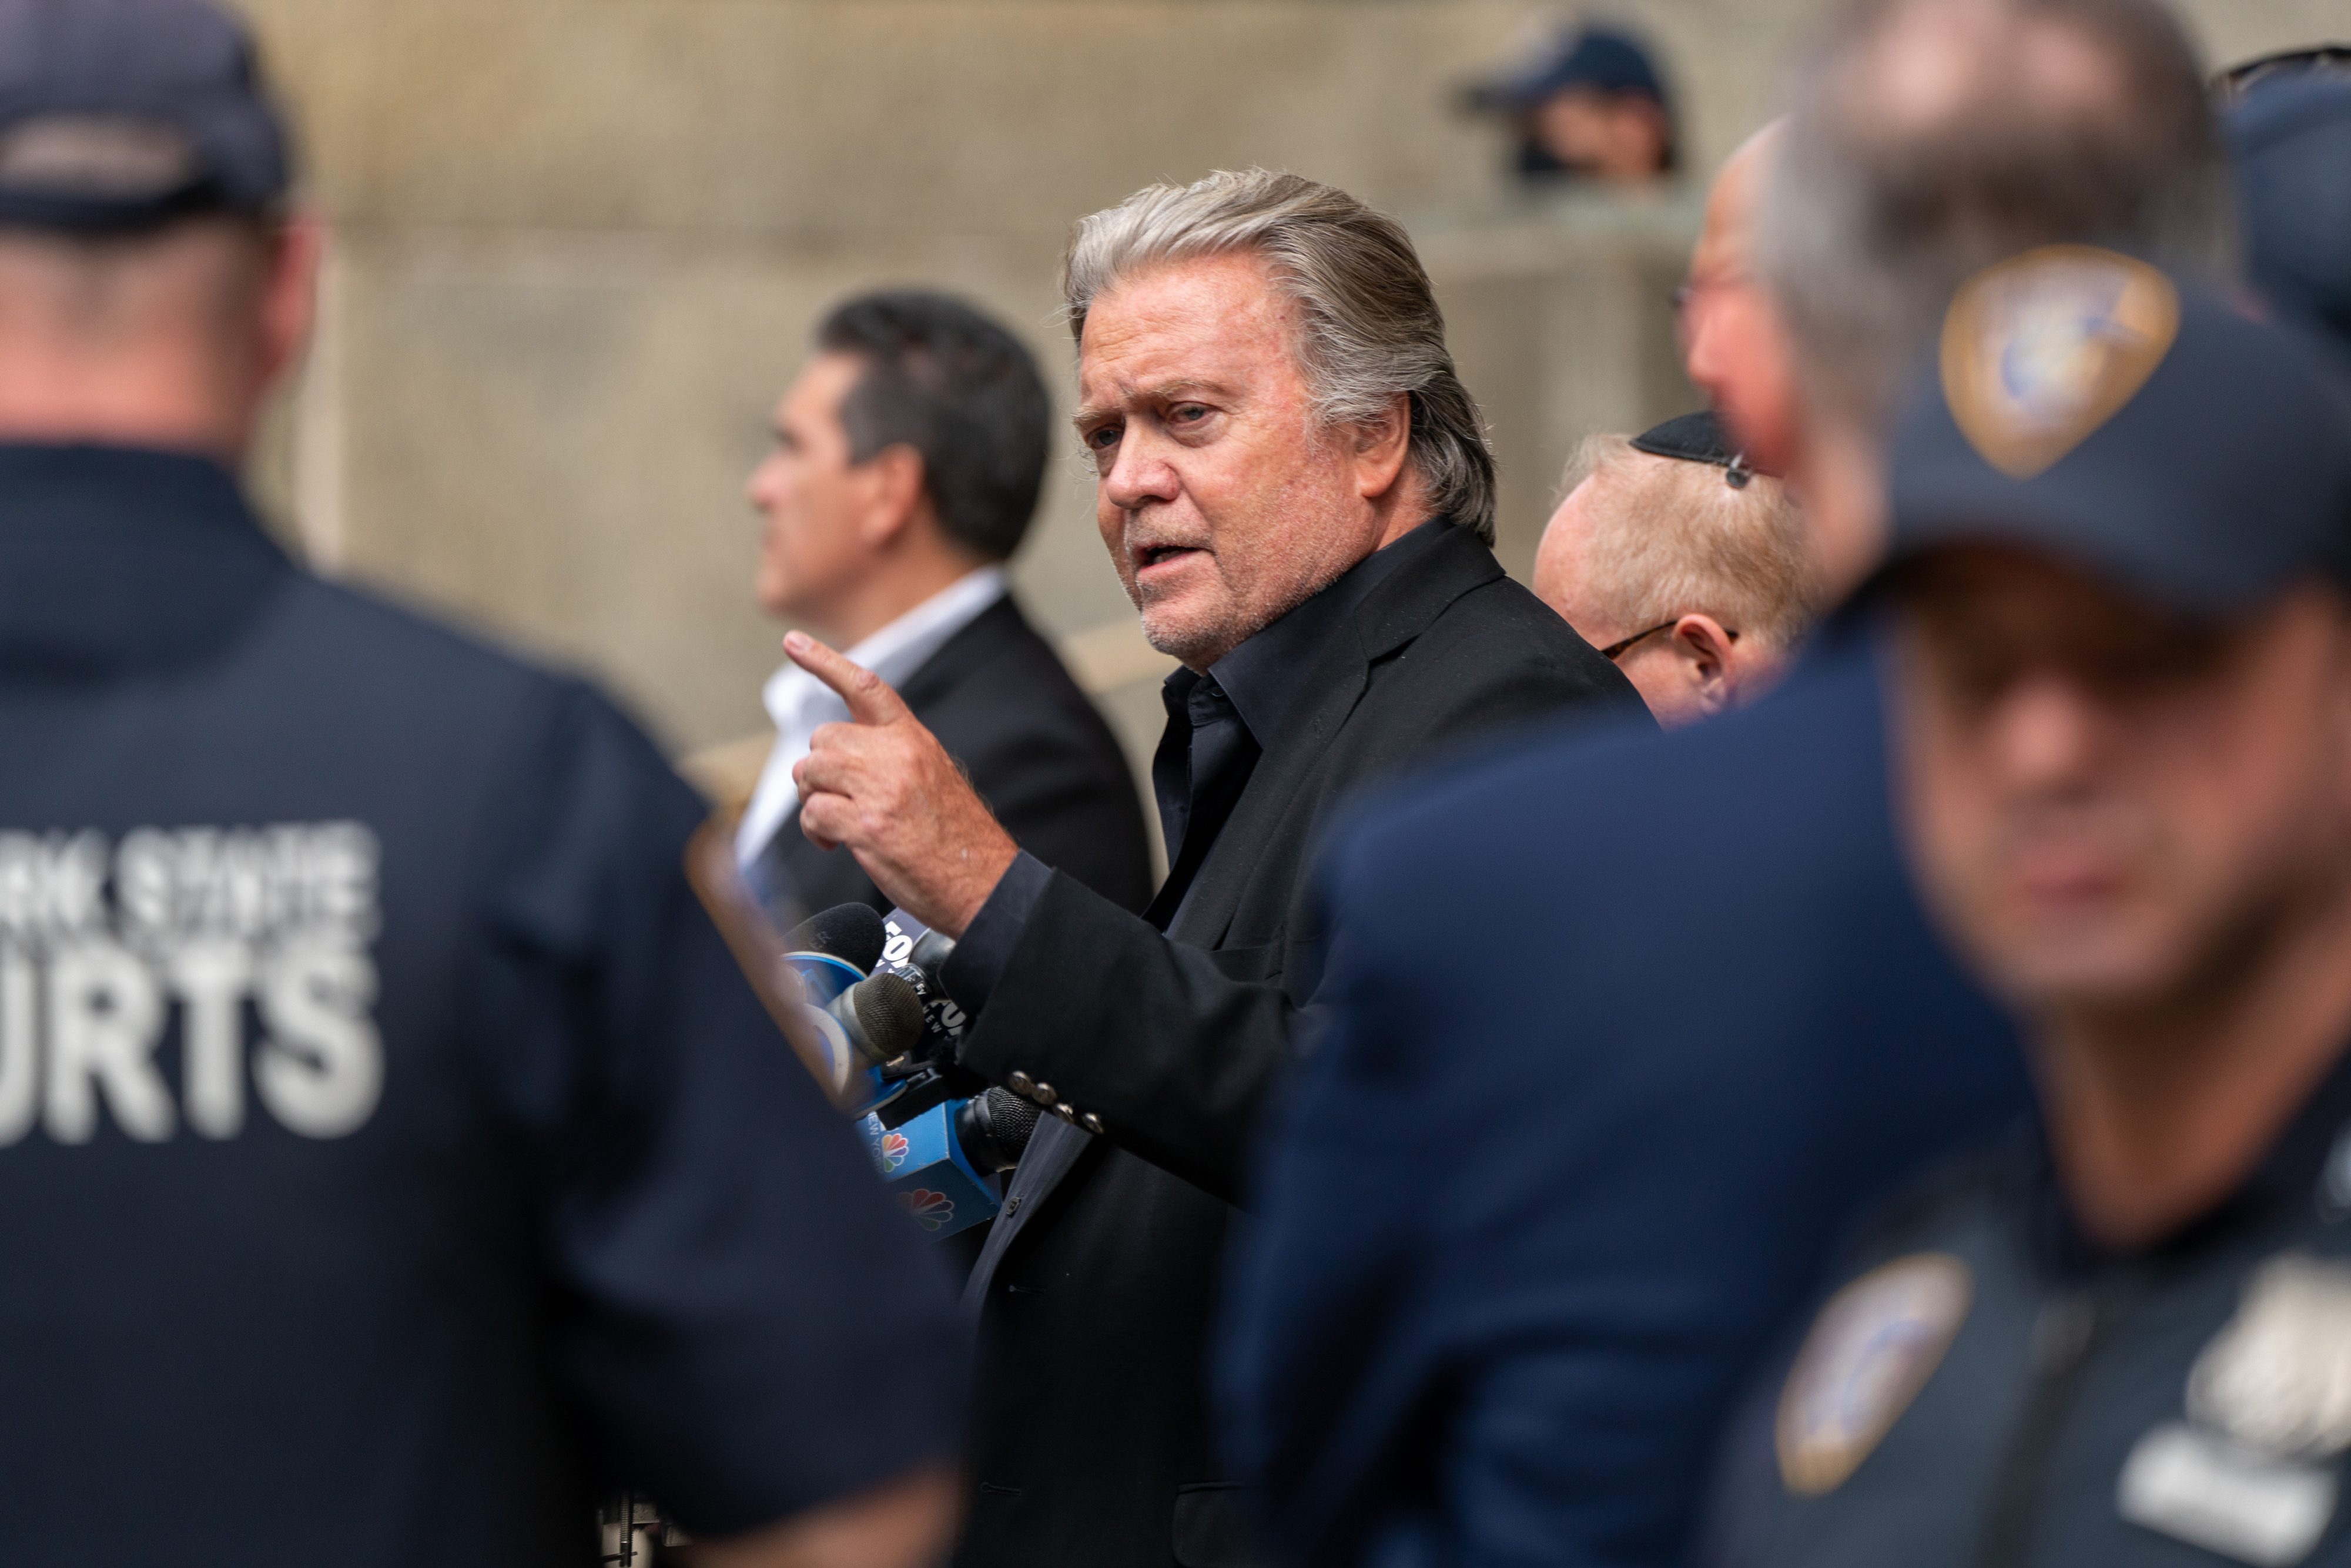 Steve Bannon speaks to the media on Sept. 8 when he pleaded not guilty to New York state charges of money laundering, conspiracy and fraud related to an alleged online scheme to raise money for the construction of a wall along the southern US border.